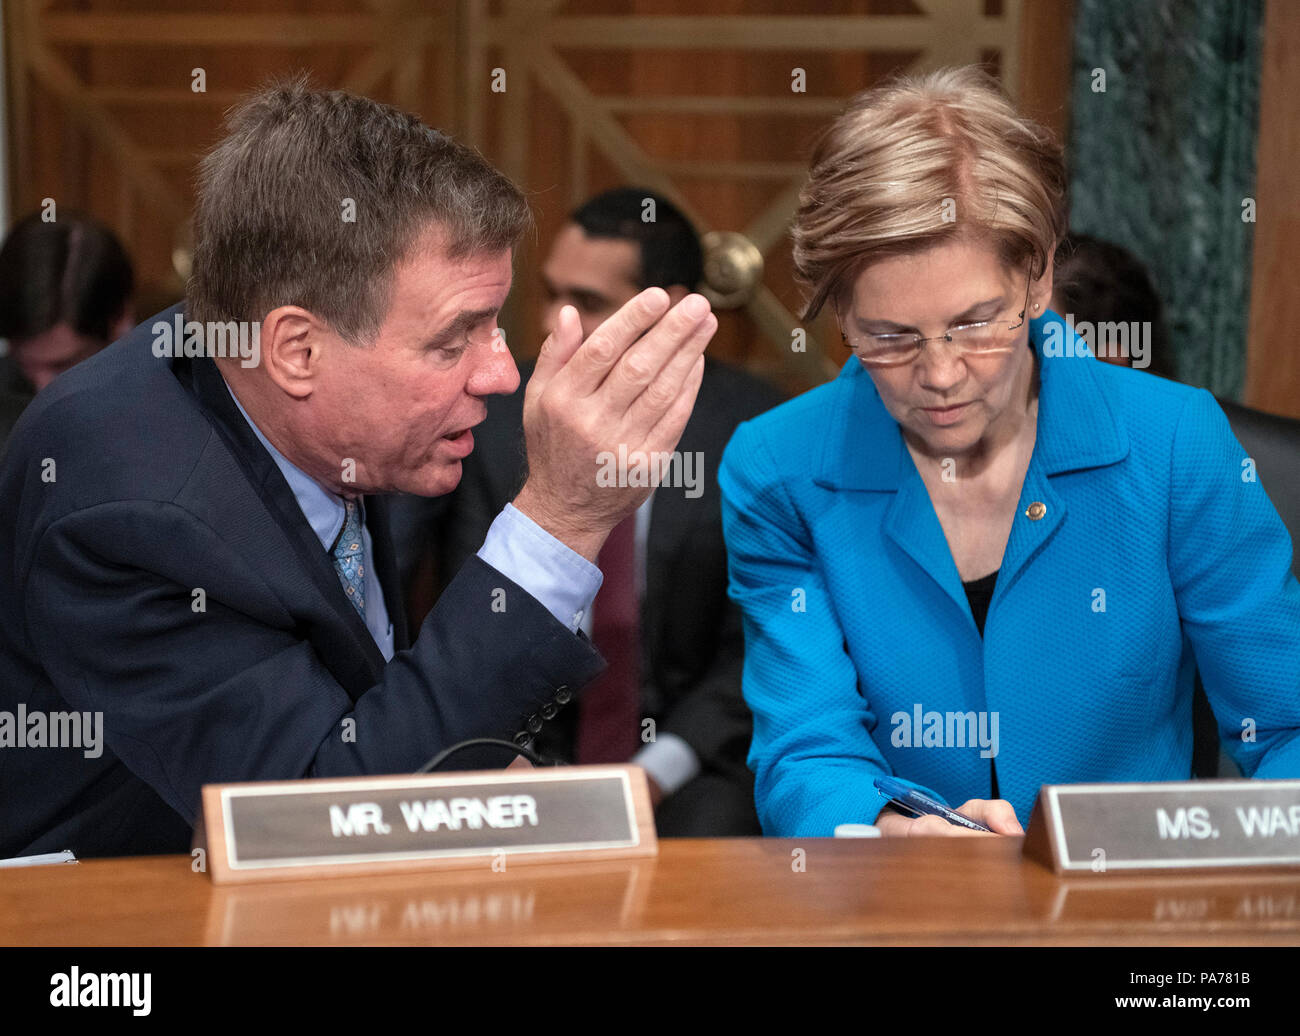 United States Senators Mark Warner (Democrat of Virginia), left, and Elizabeth Warren (Democrat of Massachusetts), right, converse prior to hearing testimony from Kathleen Laura Kraninger, on her nomination to be Director, Bureau of Consumer Financial Protection (CFPB), and Kimberly A. Reed on her nomination to be President, Export-Import Bank, before the US Senate Committee on Banking, Housing and Urban Affairs on Capitol Hill in Washington, DC on Thursday, July 19, 2018. Credit: Ron Sachs/CNP /MediaPunch Stock Photo